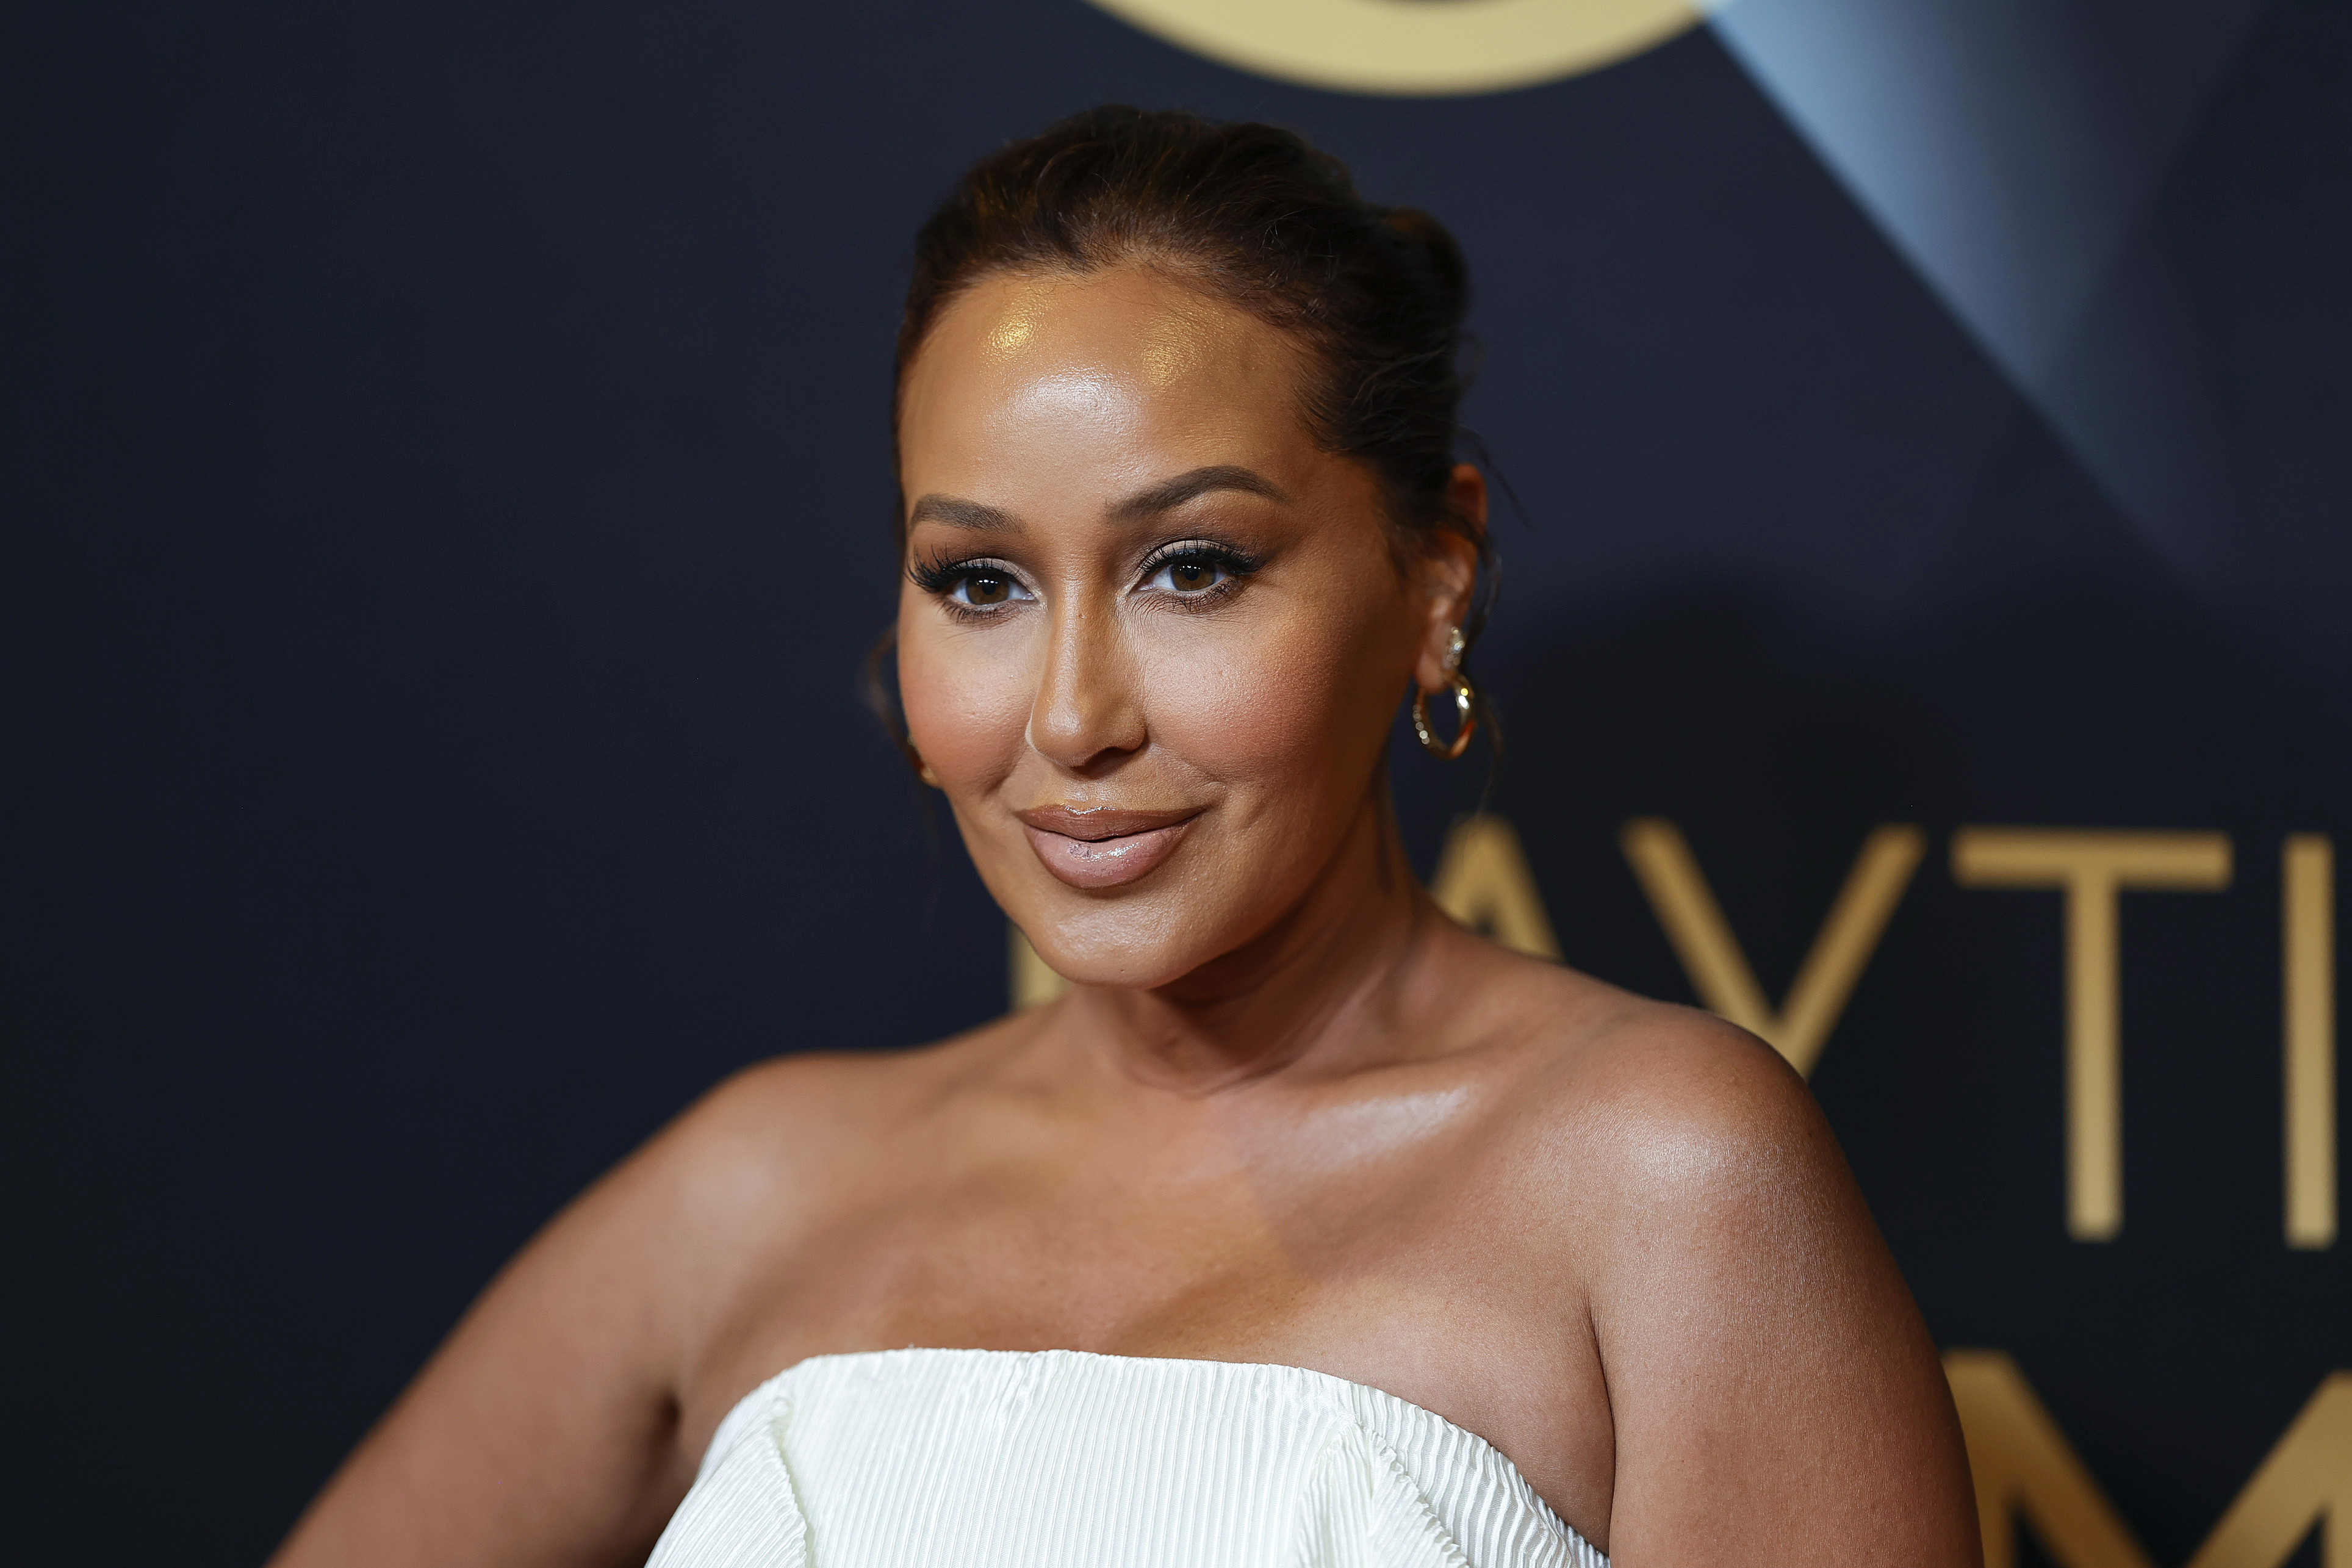 Adrienne Bailon posing in a off-shoulder dress and hoop earrings at an event